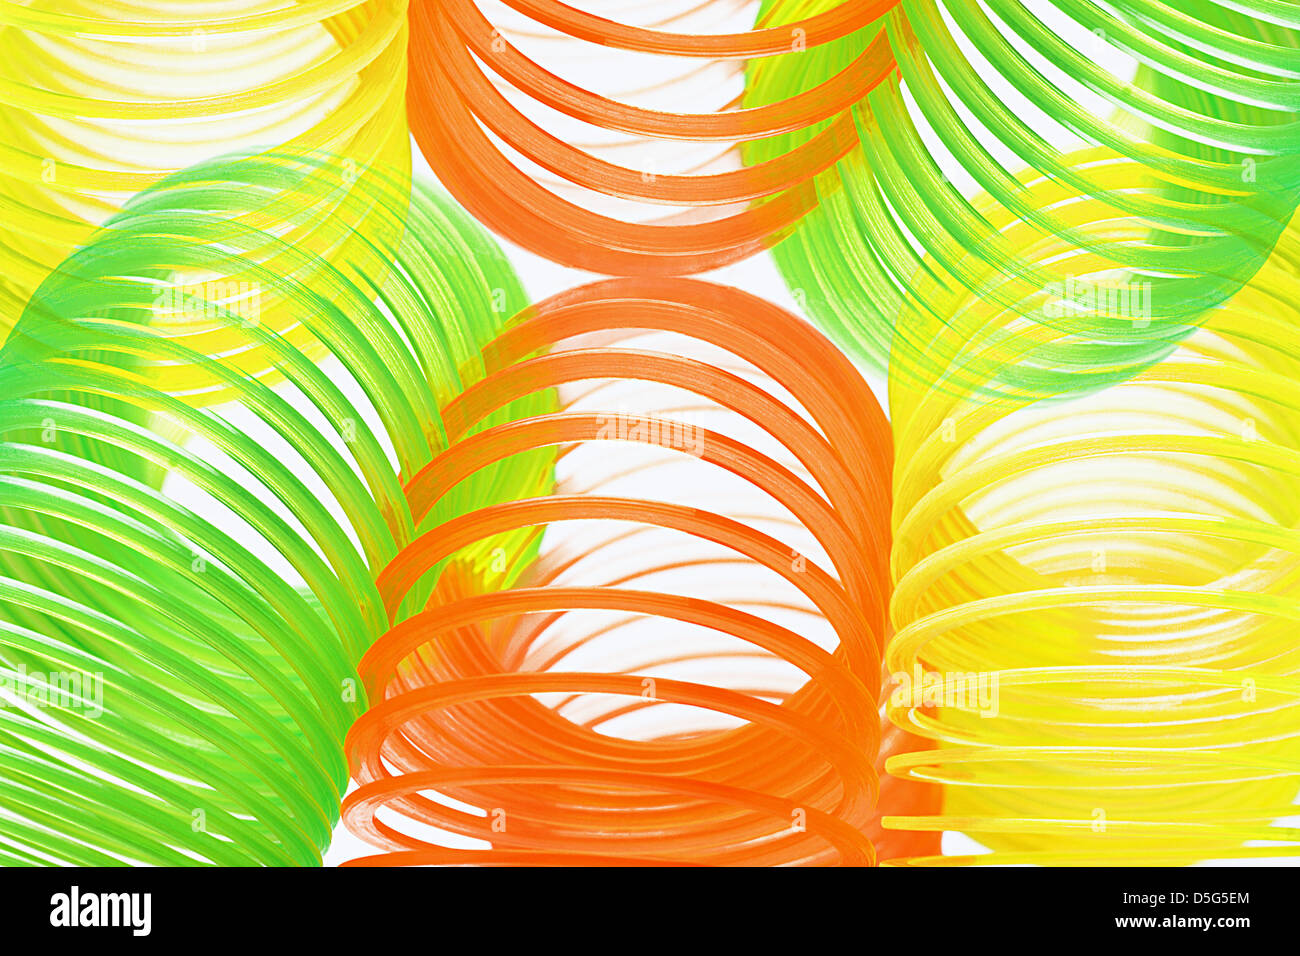 Colorful Plastic Springs Background Stock Photo